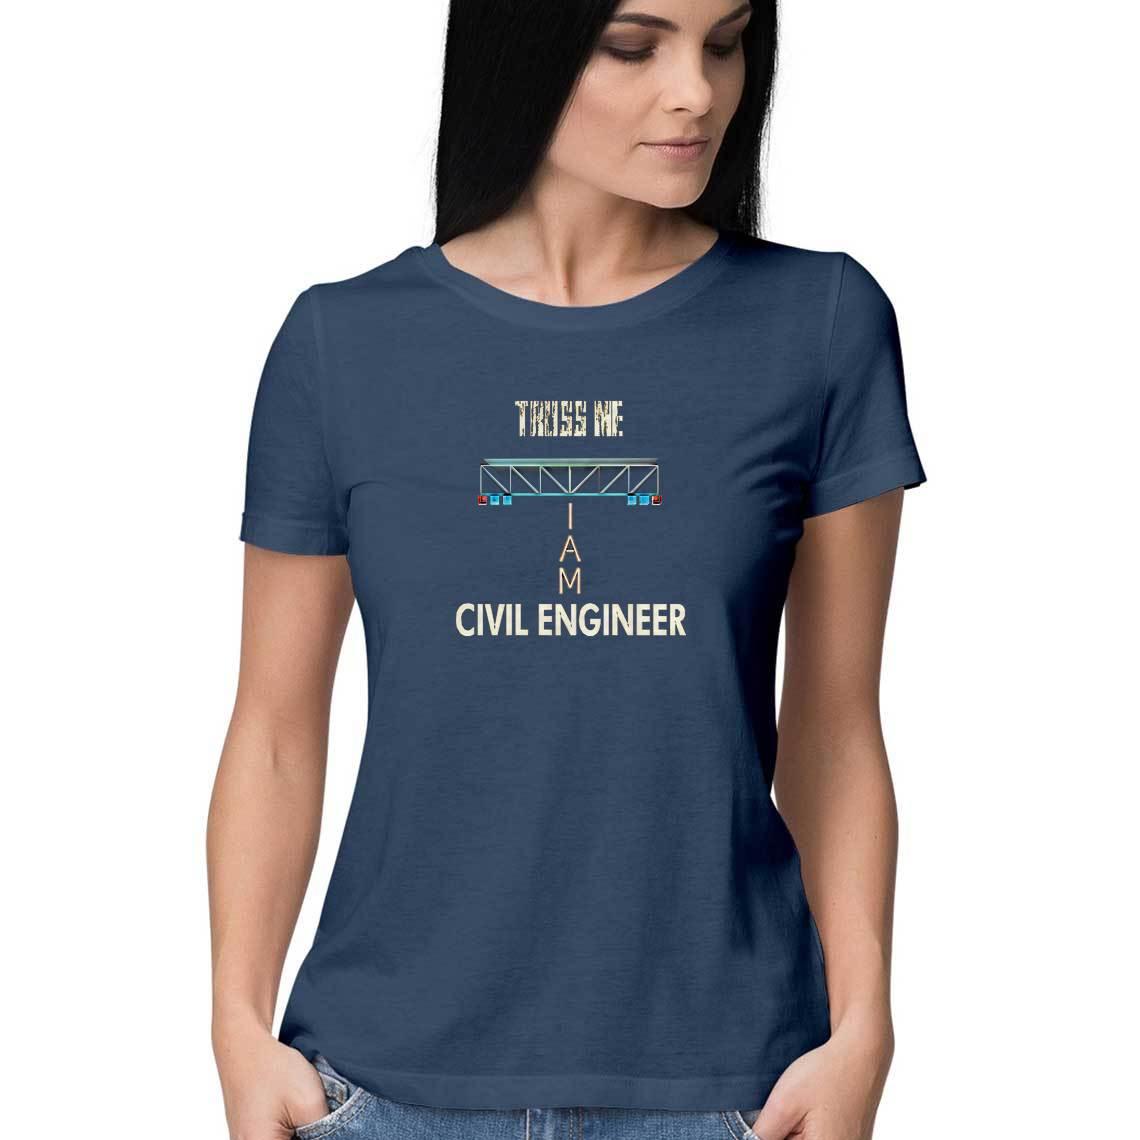 Navy Blue Cotton Tshirt for Civil Engineers